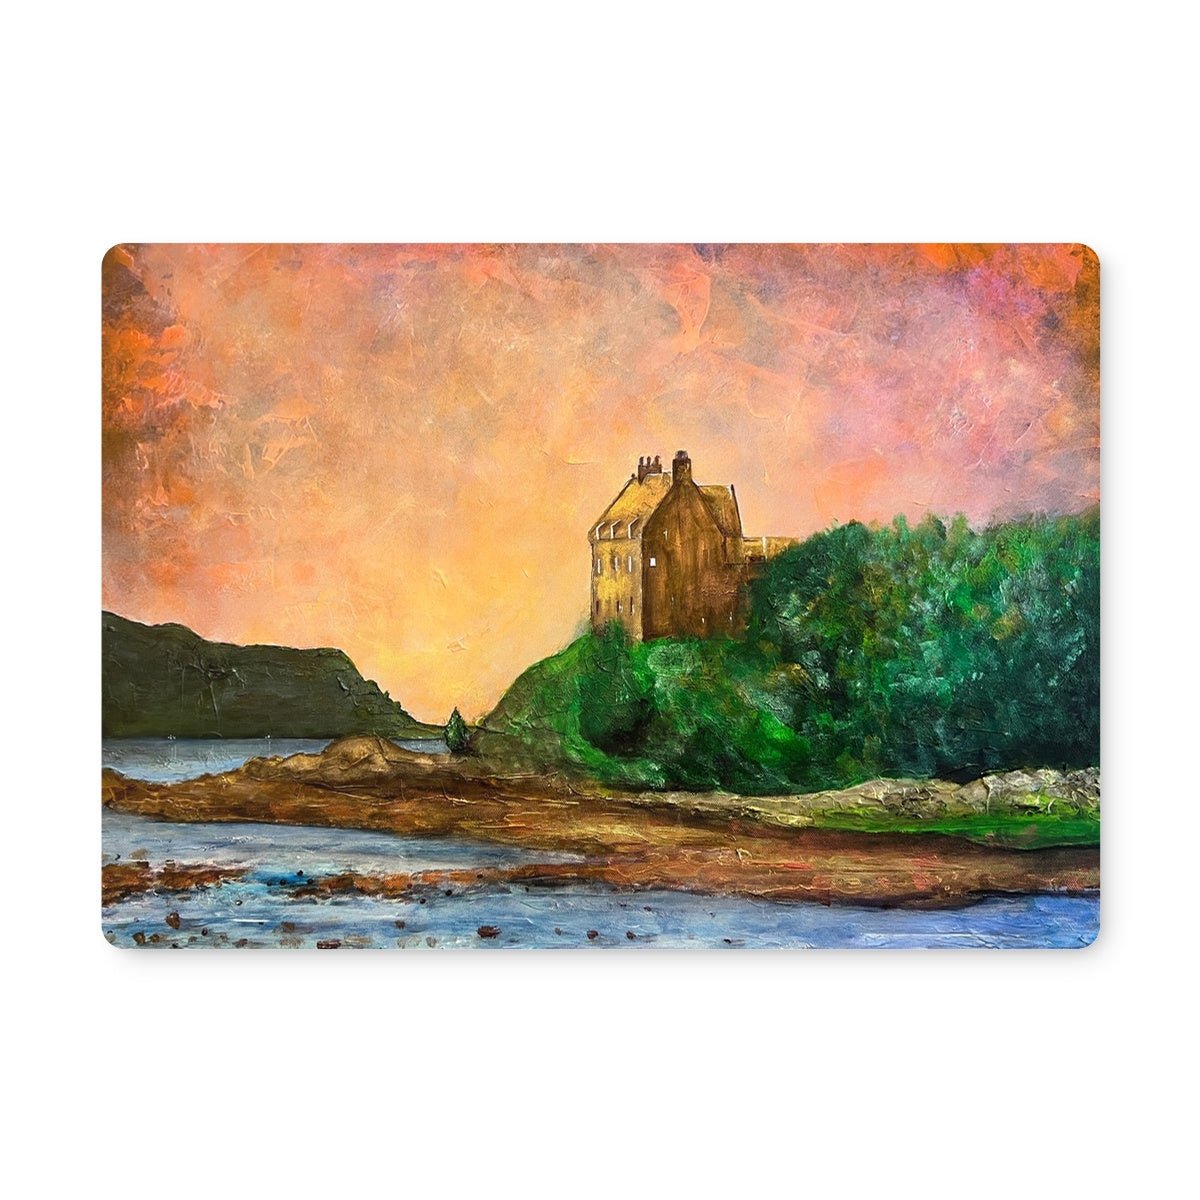 Duntrune Castle Art Gifts Placemat-Placemats-Historic & Iconic Scotland Art Gallery-2 Placemats-Paintings, Prints, Homeware, Art Gifts From Scotland By Scottish Artist Kevin Hunter